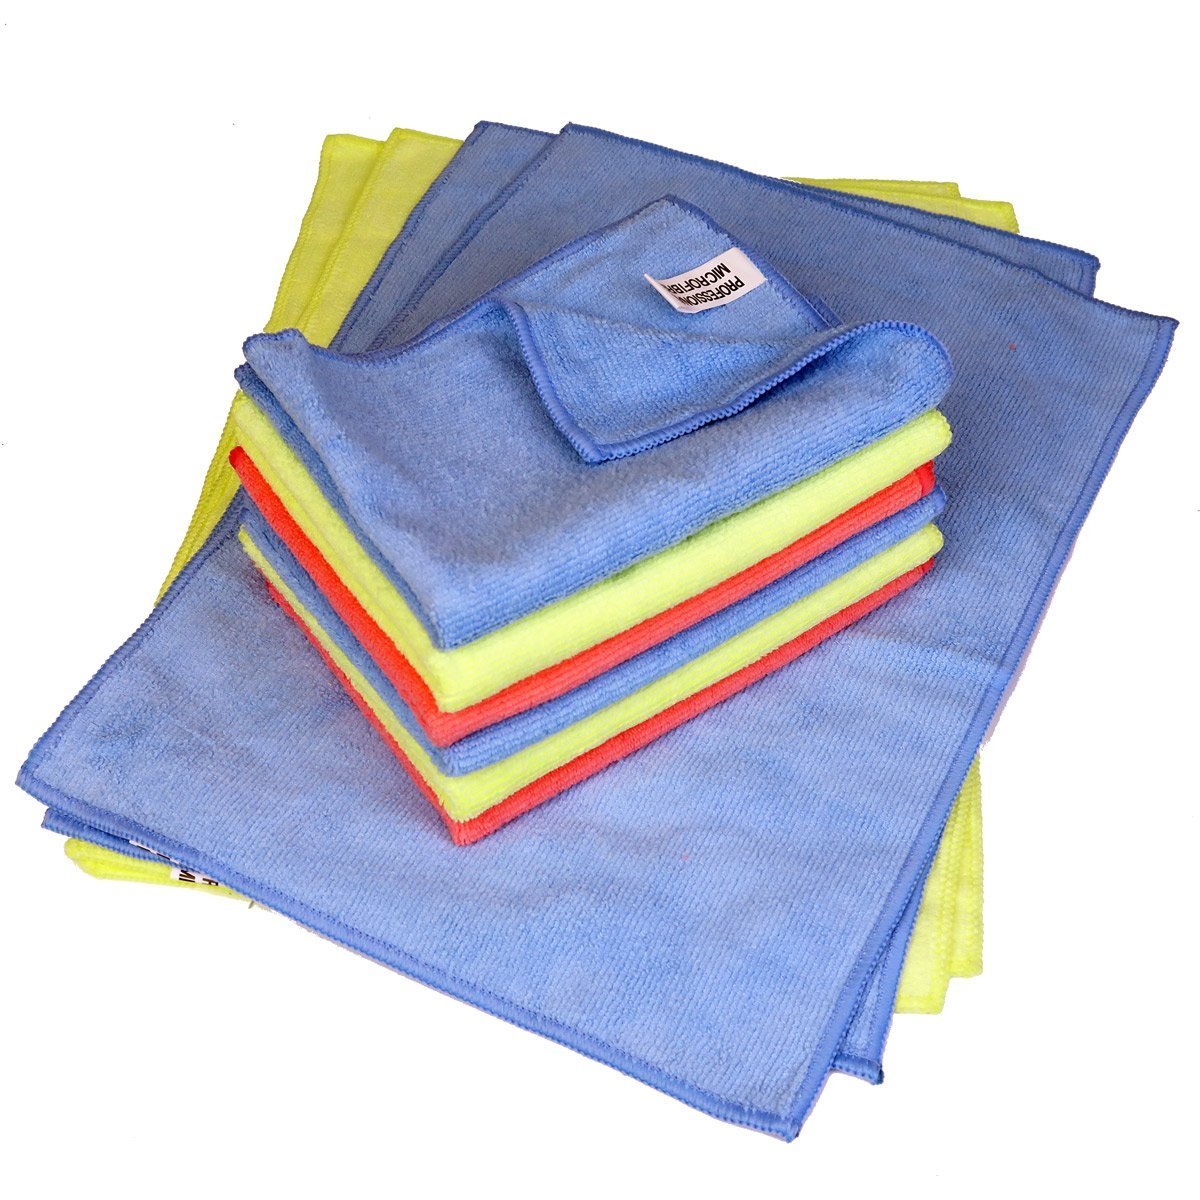 Microfibre Cleaning & Drying Towel 30cms x 40cms - 50 pack